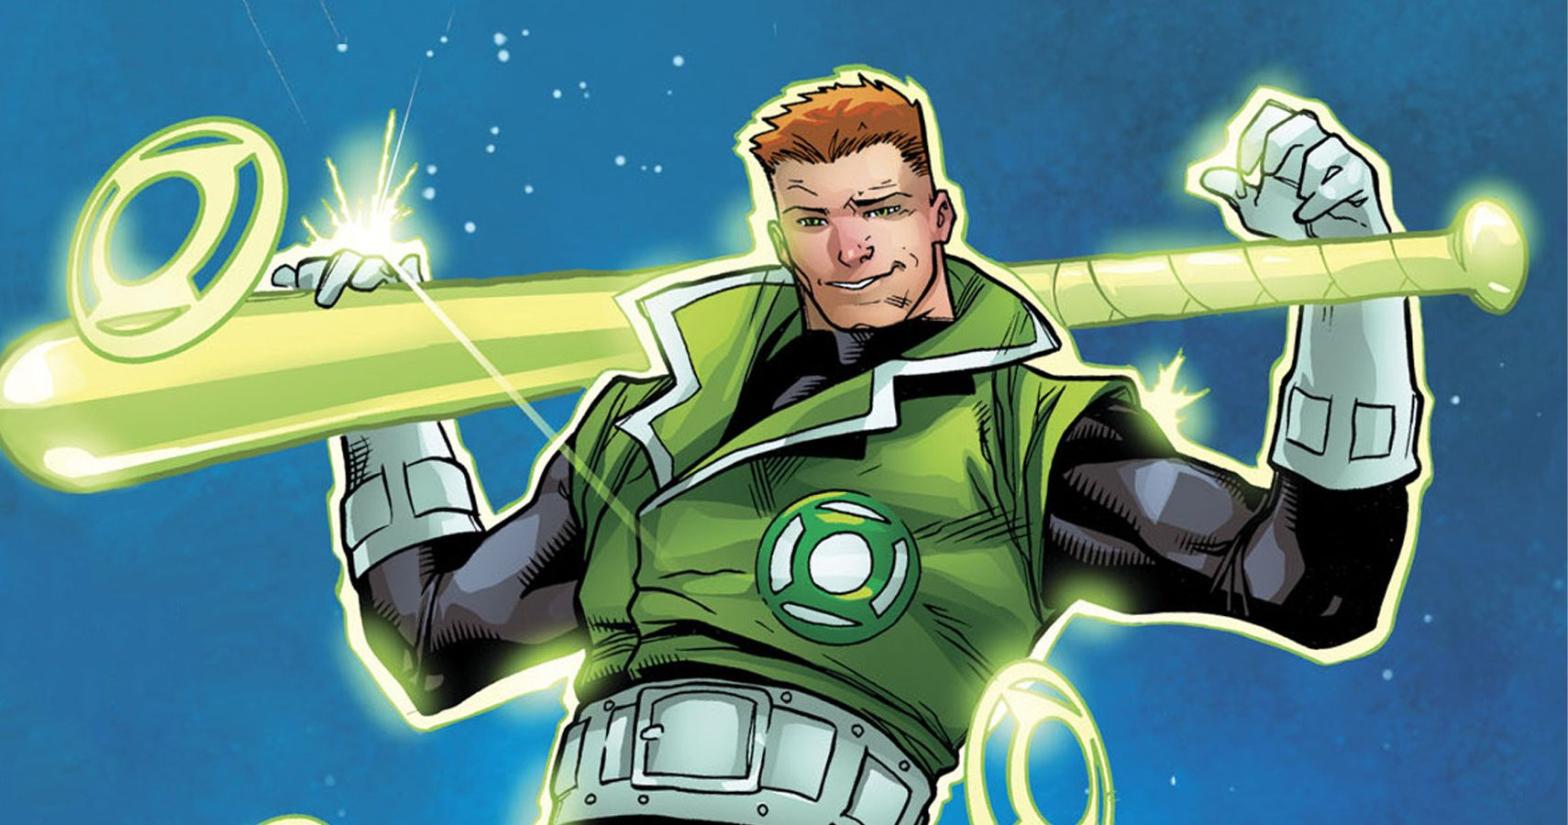 Guy Gardner will be one of the Lanterns in the upcoming Green Lantern TV show. (Image: DC Comics)